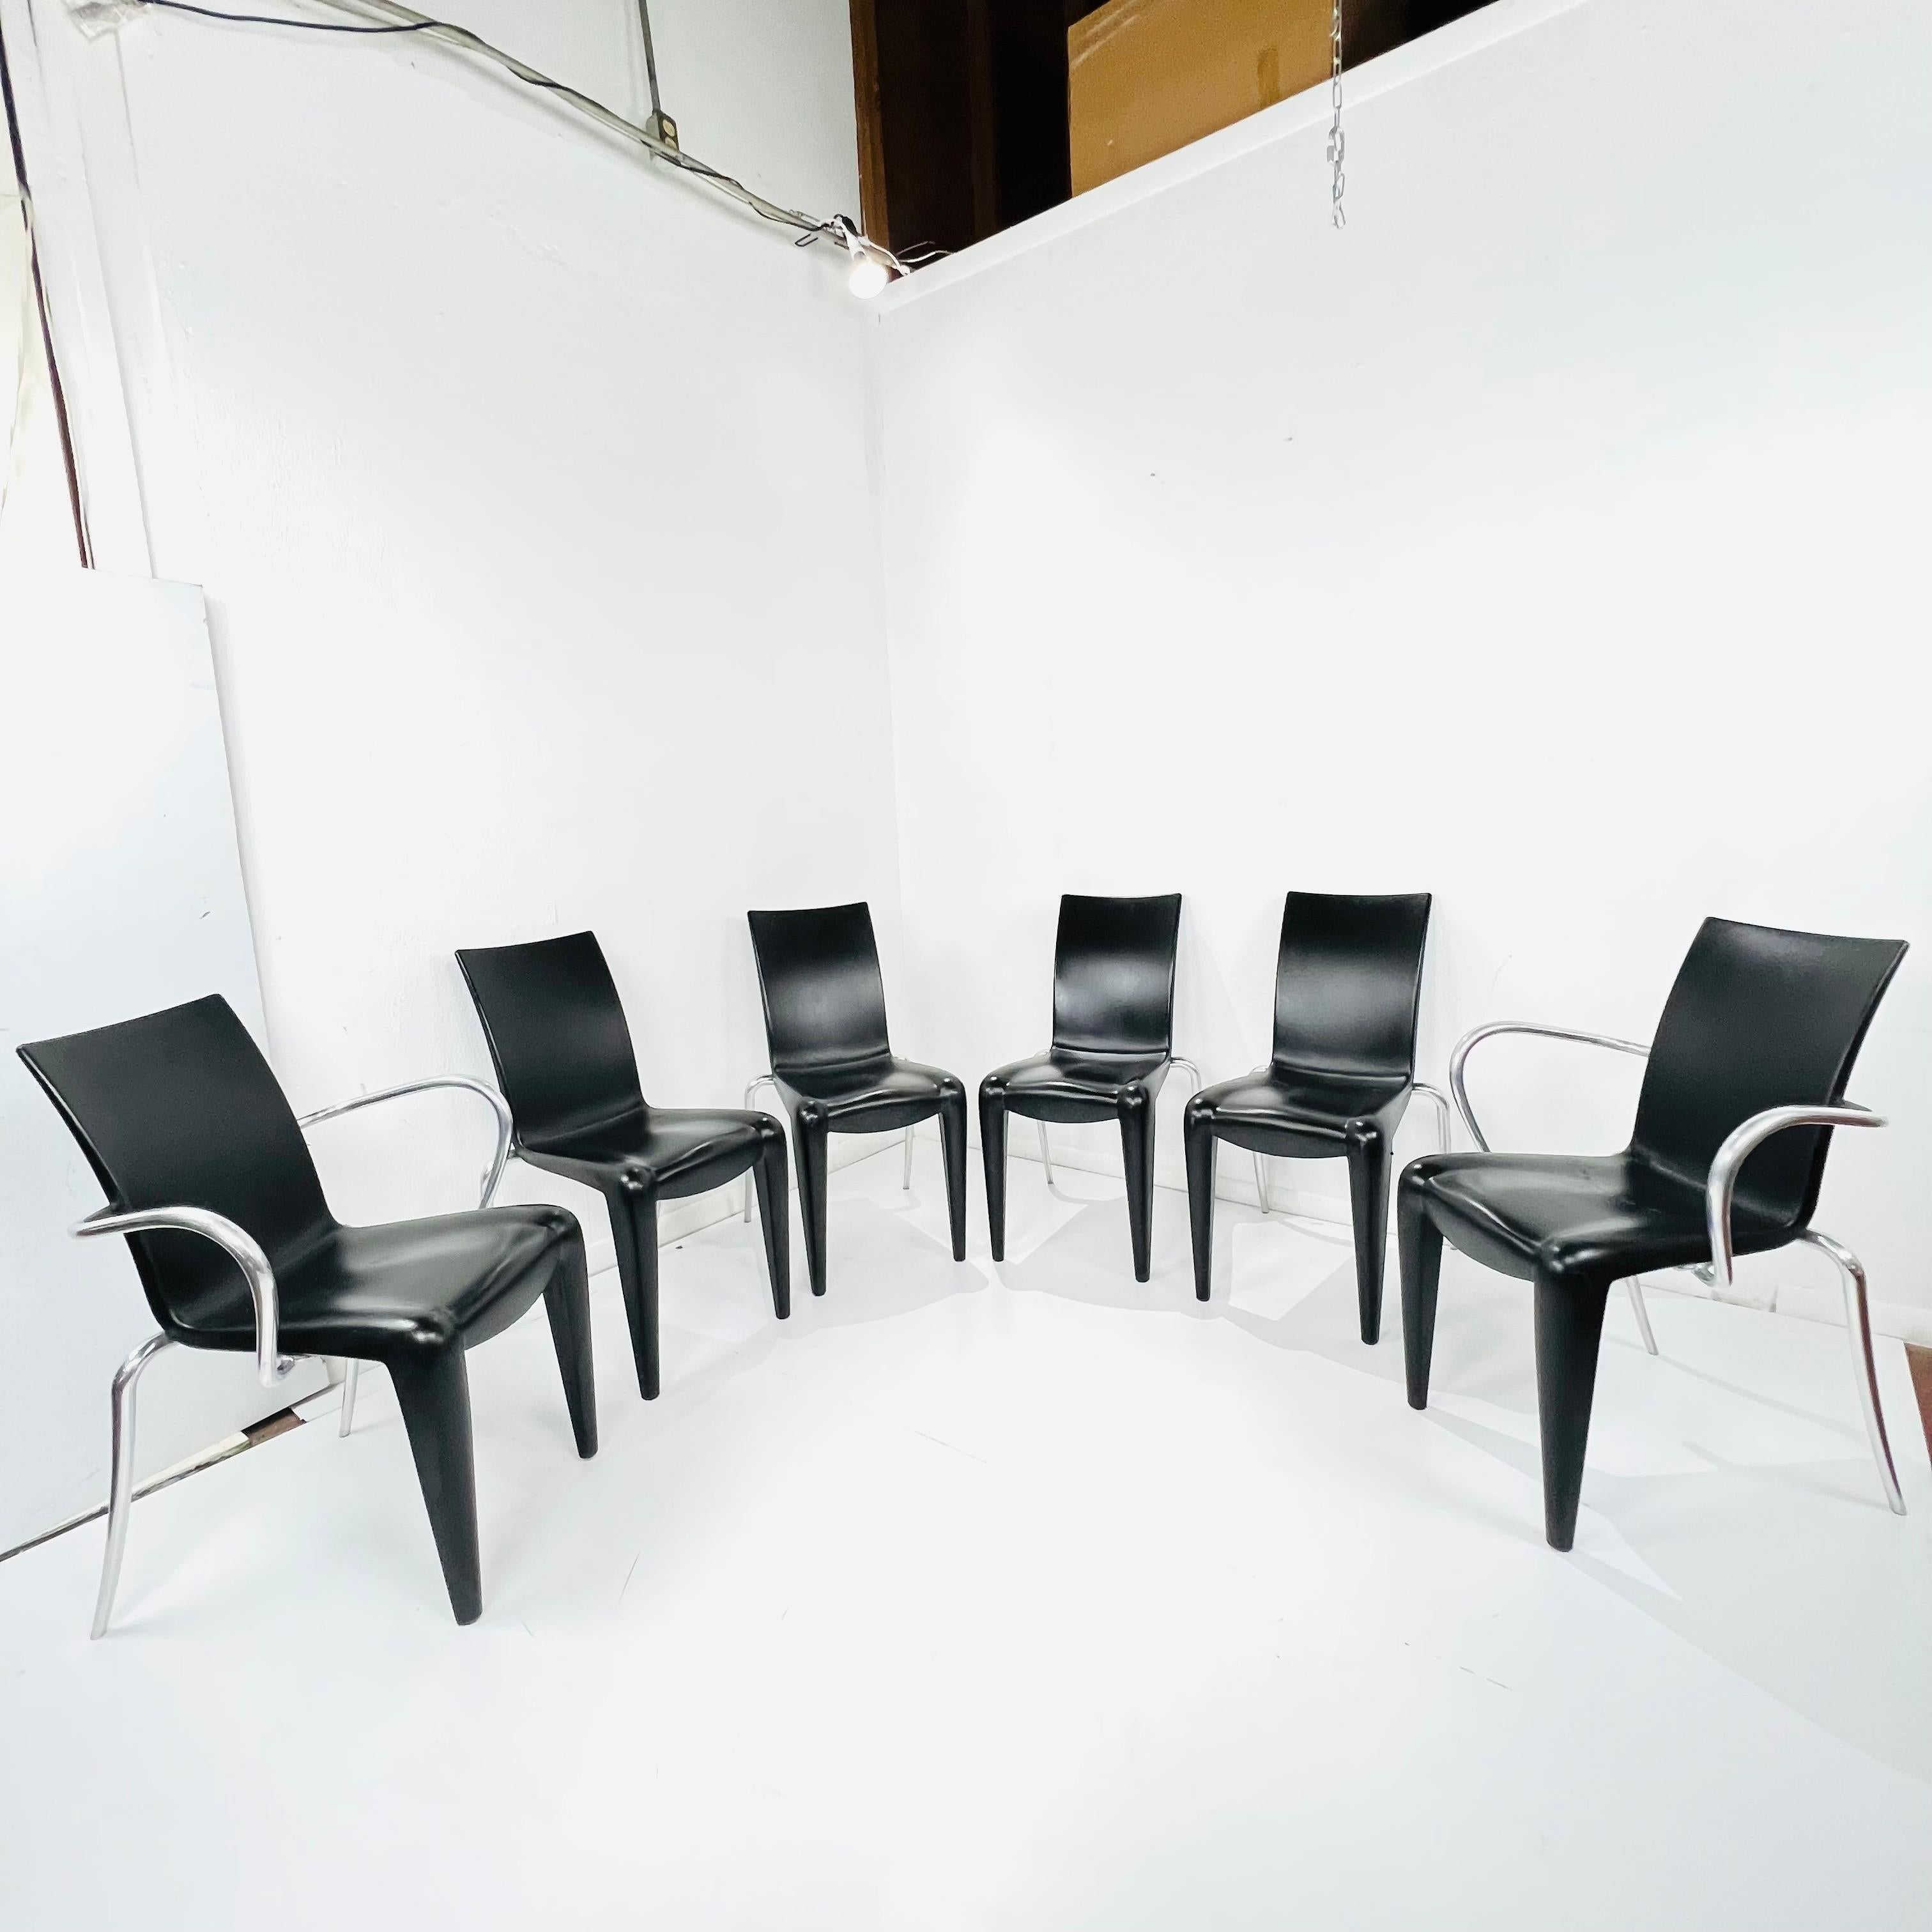 Philippe Starck is regarded as the leading French figure in the area of new design in the eighties. In 1991 he designed the Louis 20 chair with his characteristic Starck front curve, featuring voluminous hollow front legs and a springy back section